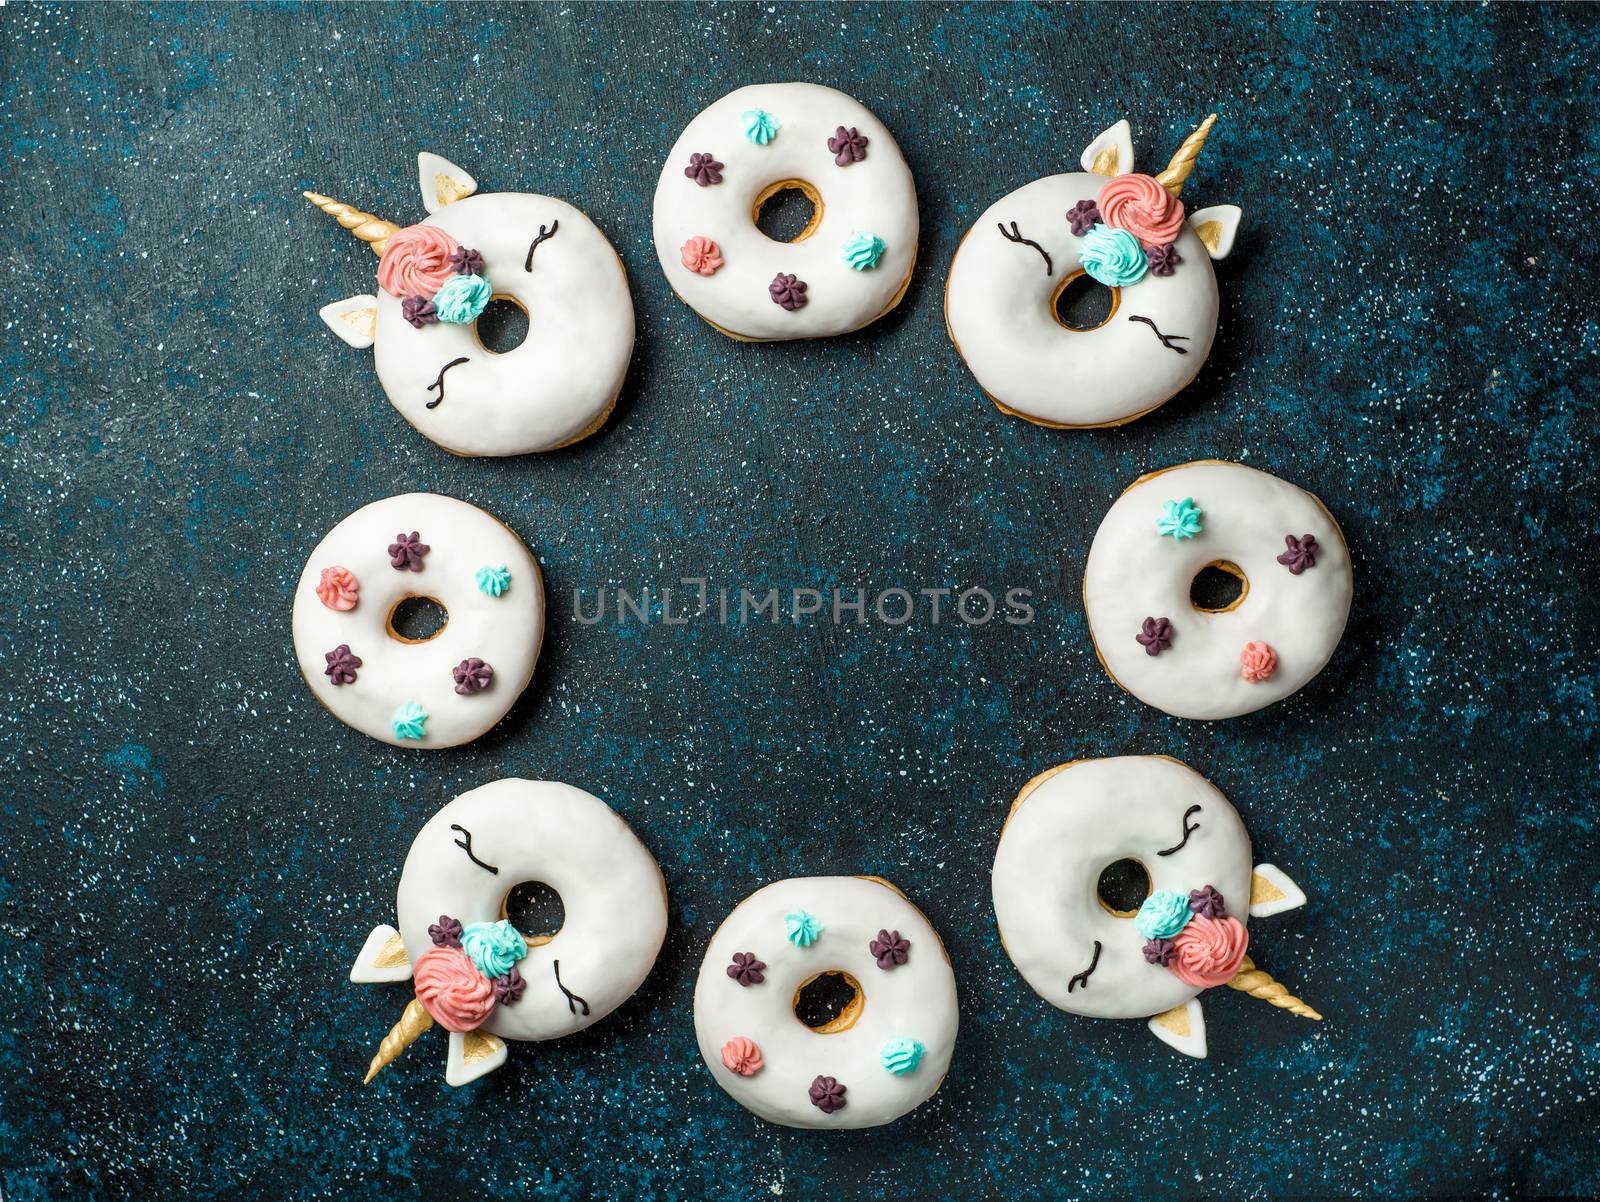 Unicorn donuts with copy space by fascinadora